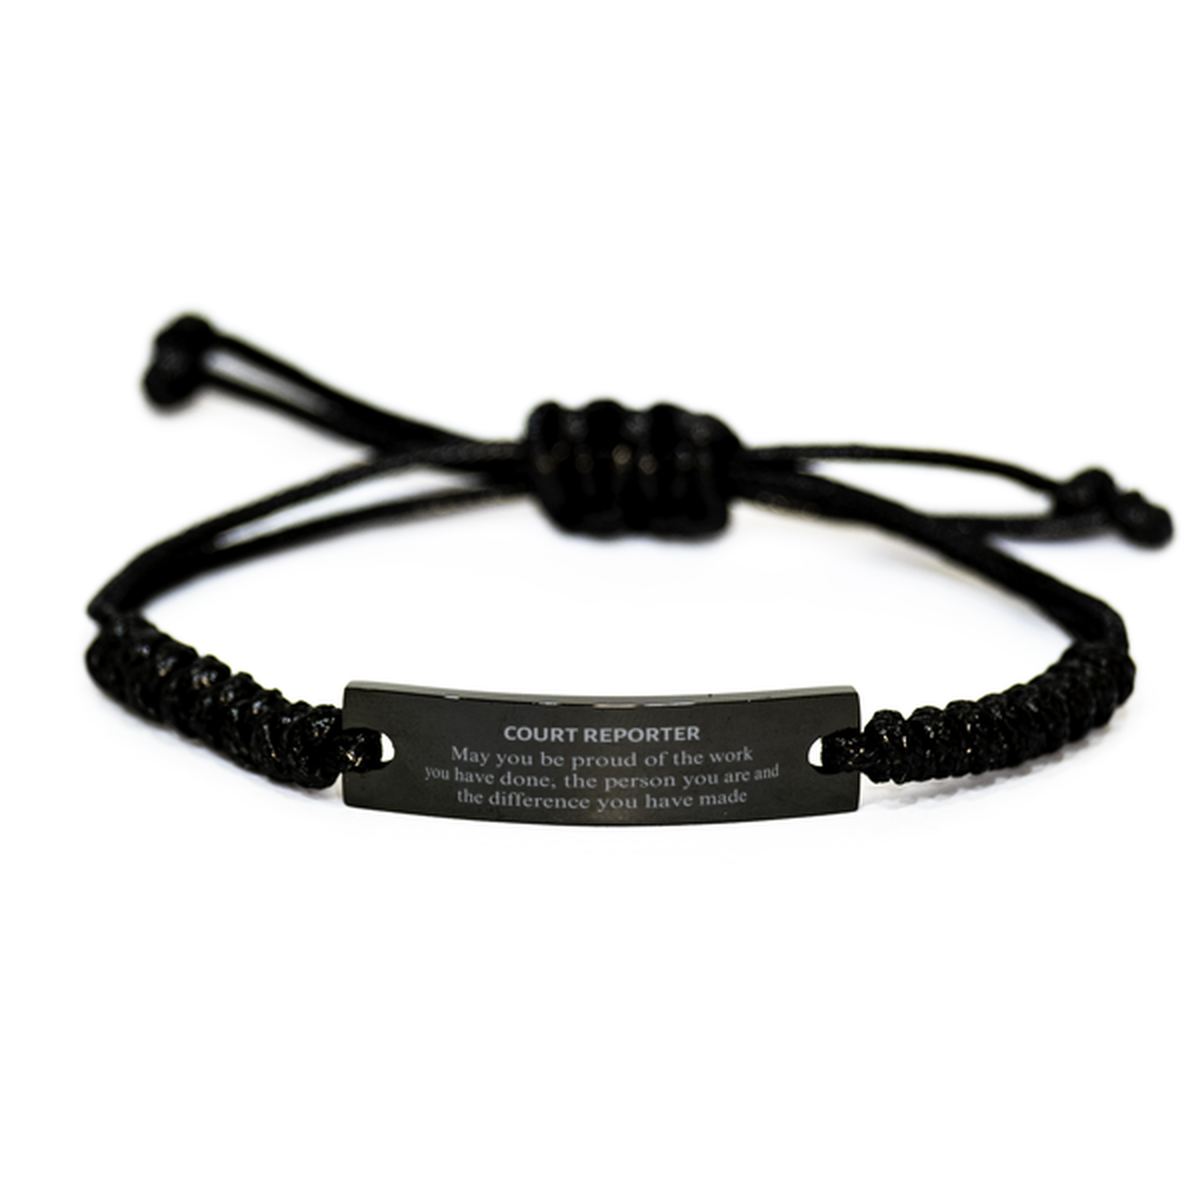 Court Reporter May you be proud of the work you have done, Retirement Court Reporter Black Rope Bracelet for Colleague Appreciation Gifts Amazing for Court Reporter